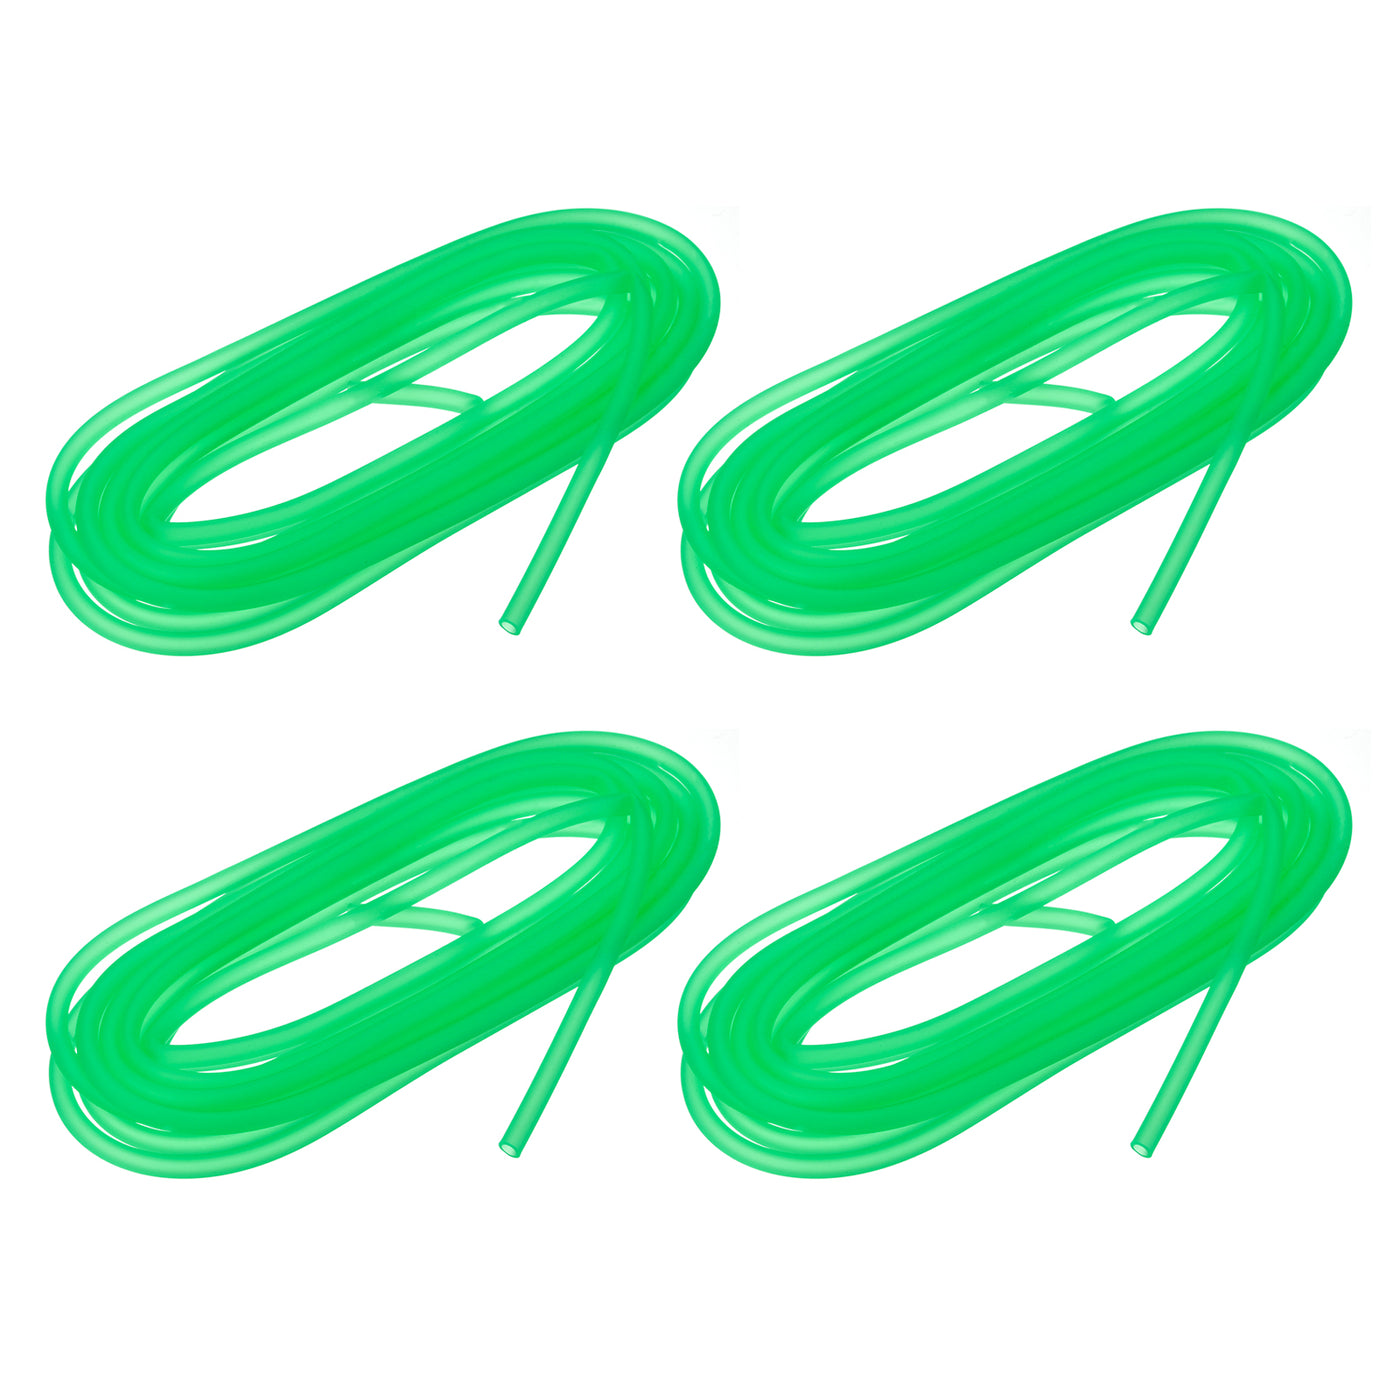 uxcell Uxcell Silicone Tubing 5/32" ID, 15/64" OD 4Pcs 13.12 Ft for Pump Transfer, Grass Green